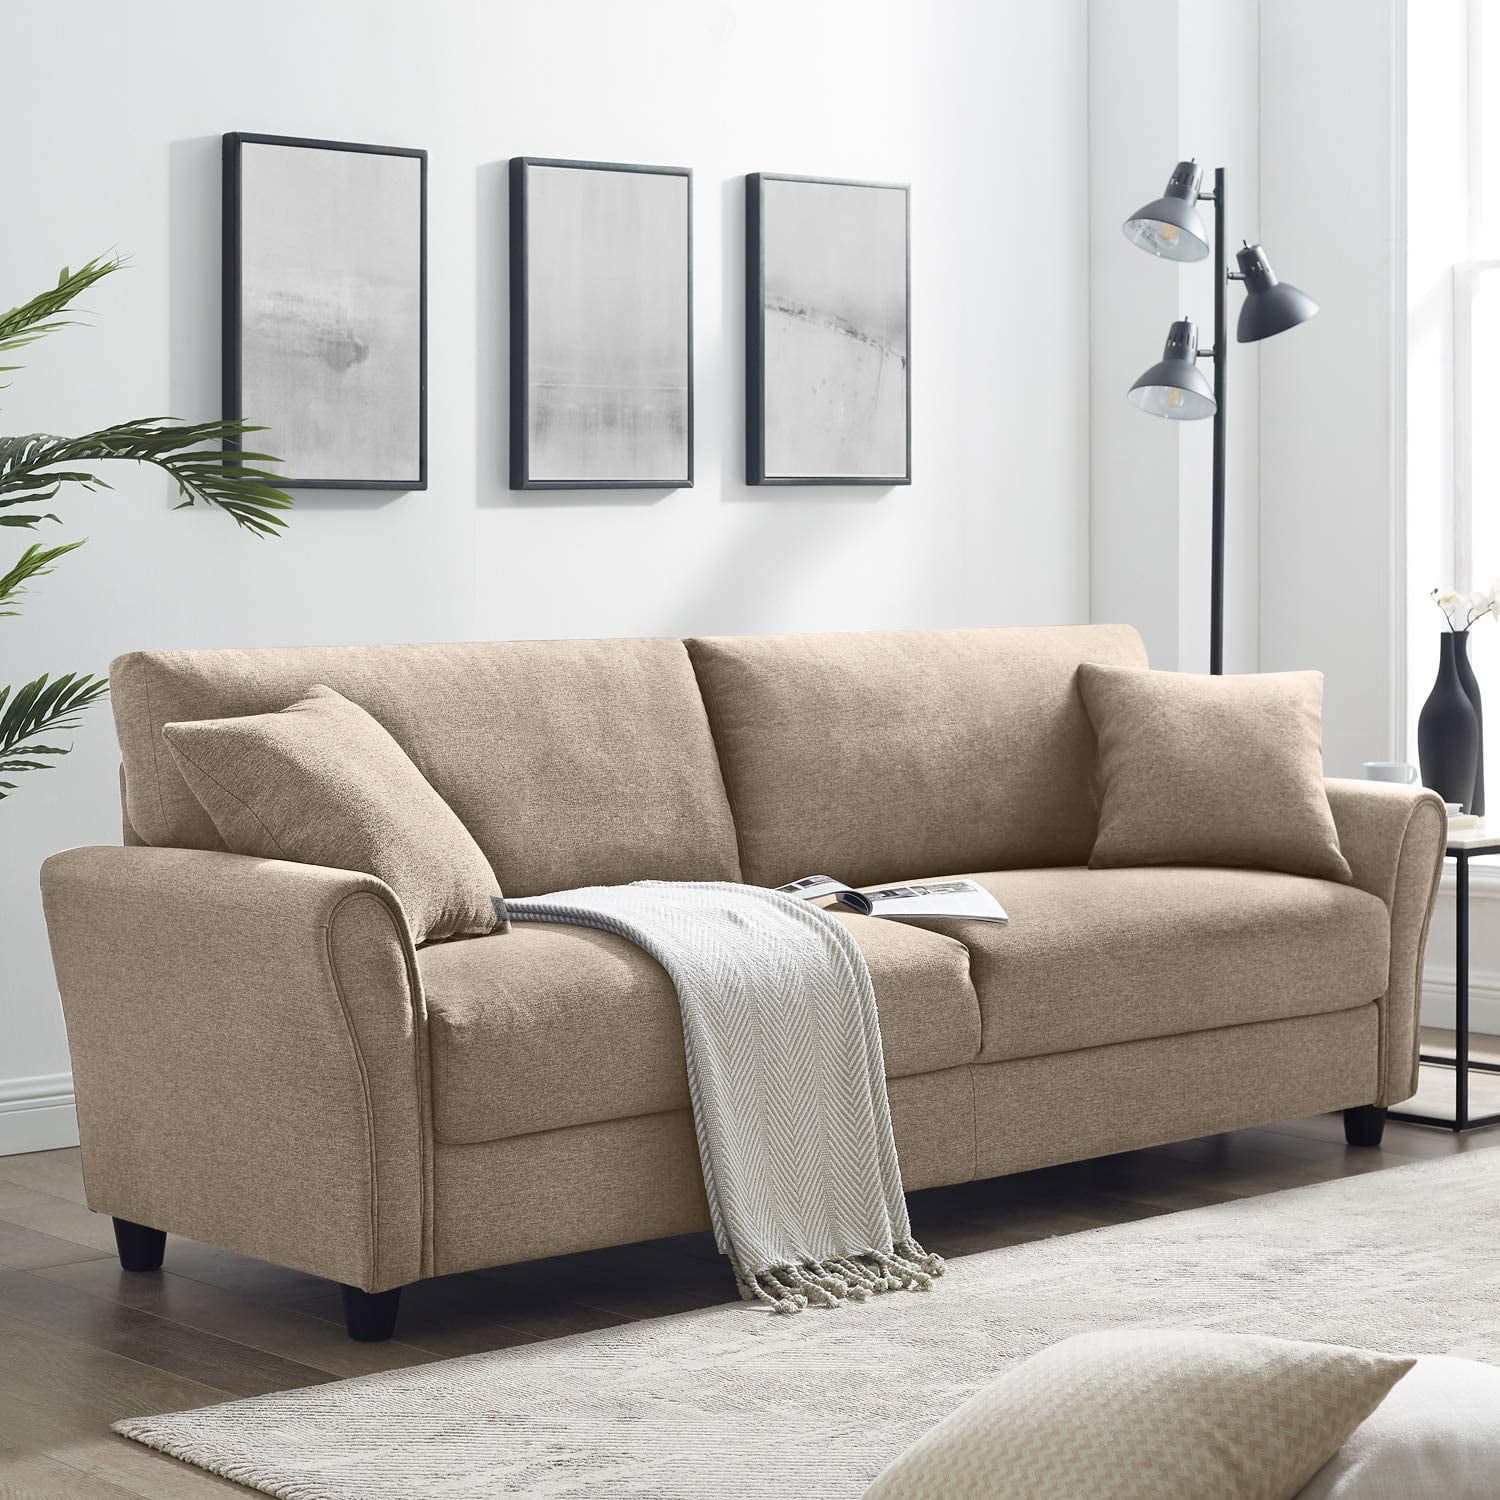 Furniture Sofas & Couches 85 Inch Couch Sofa Modern Upholstered Linen Pertaining To Sofas For Compact Living (View 14 of 20)